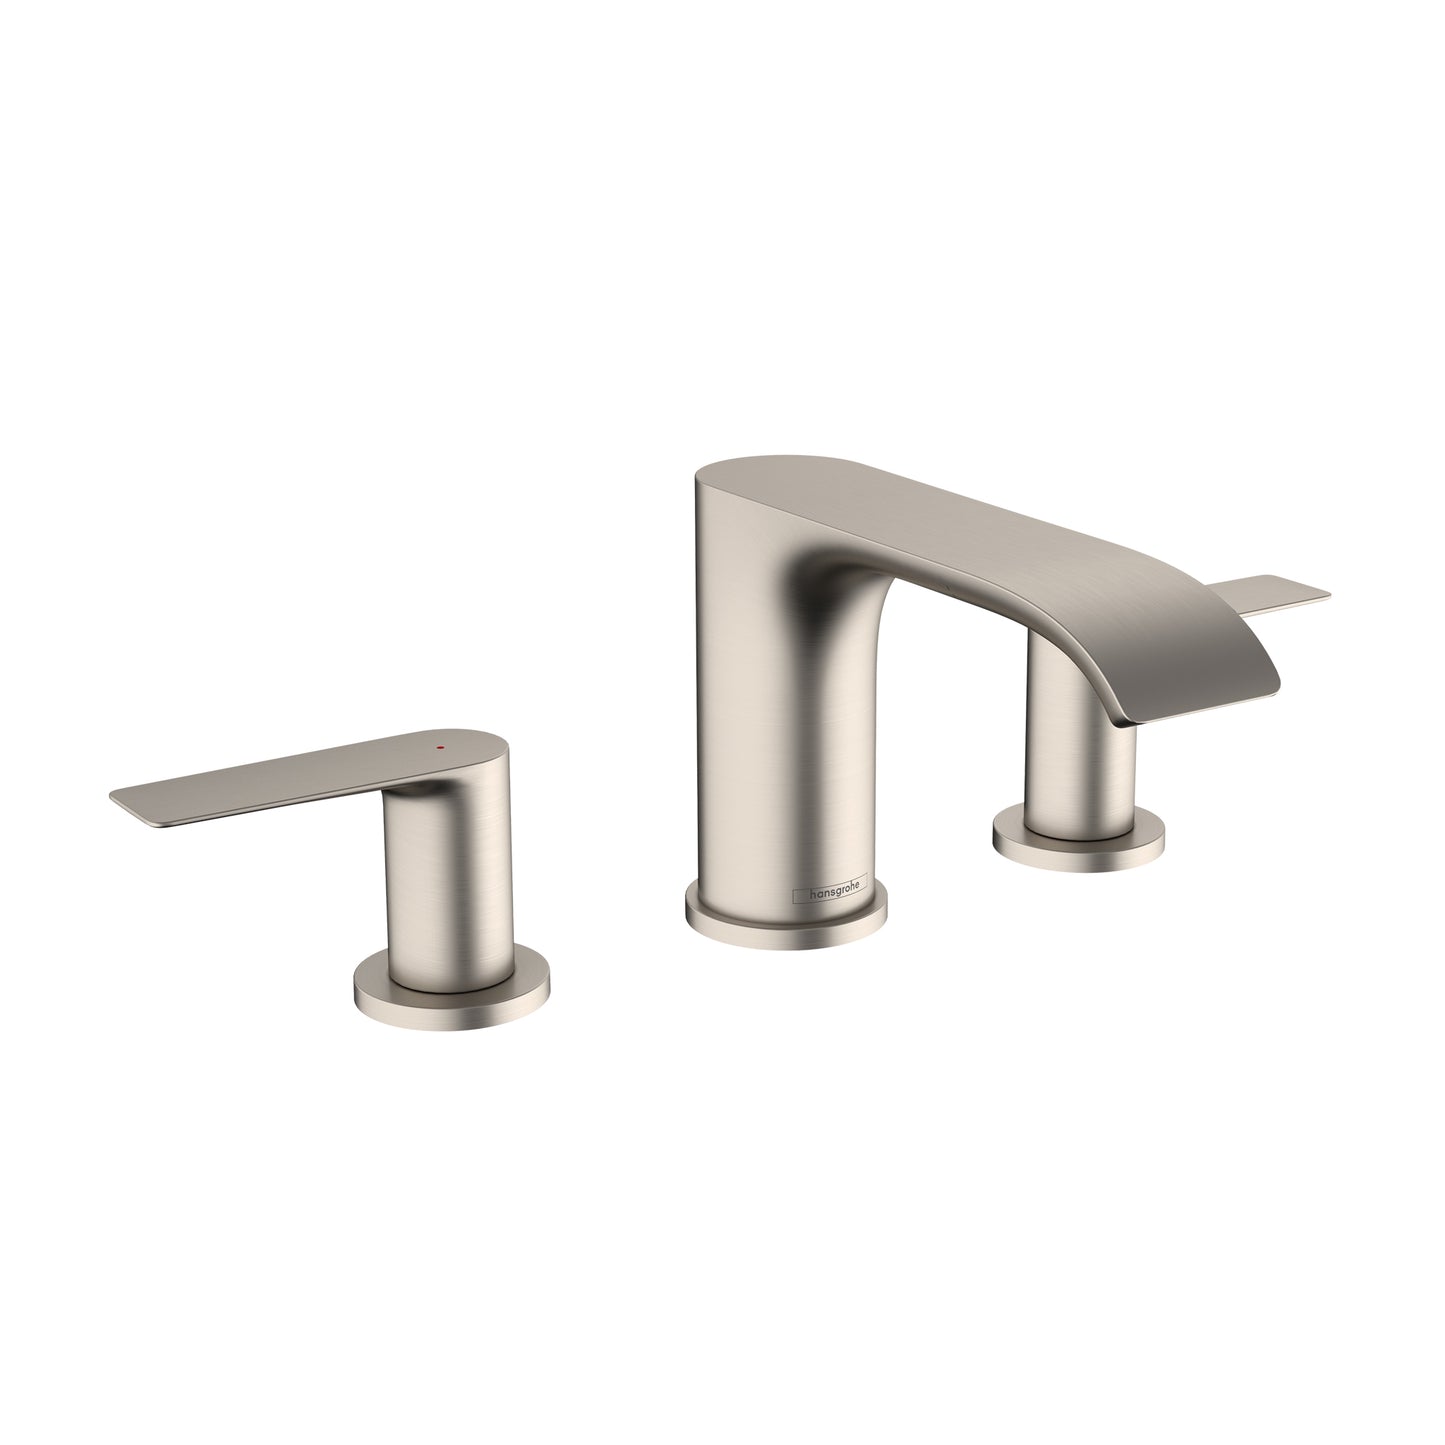 HANSGROHE 75033821 Brushed Nickel Vivenis Modern Widespread Bathroom Faucet 1.2 GPM